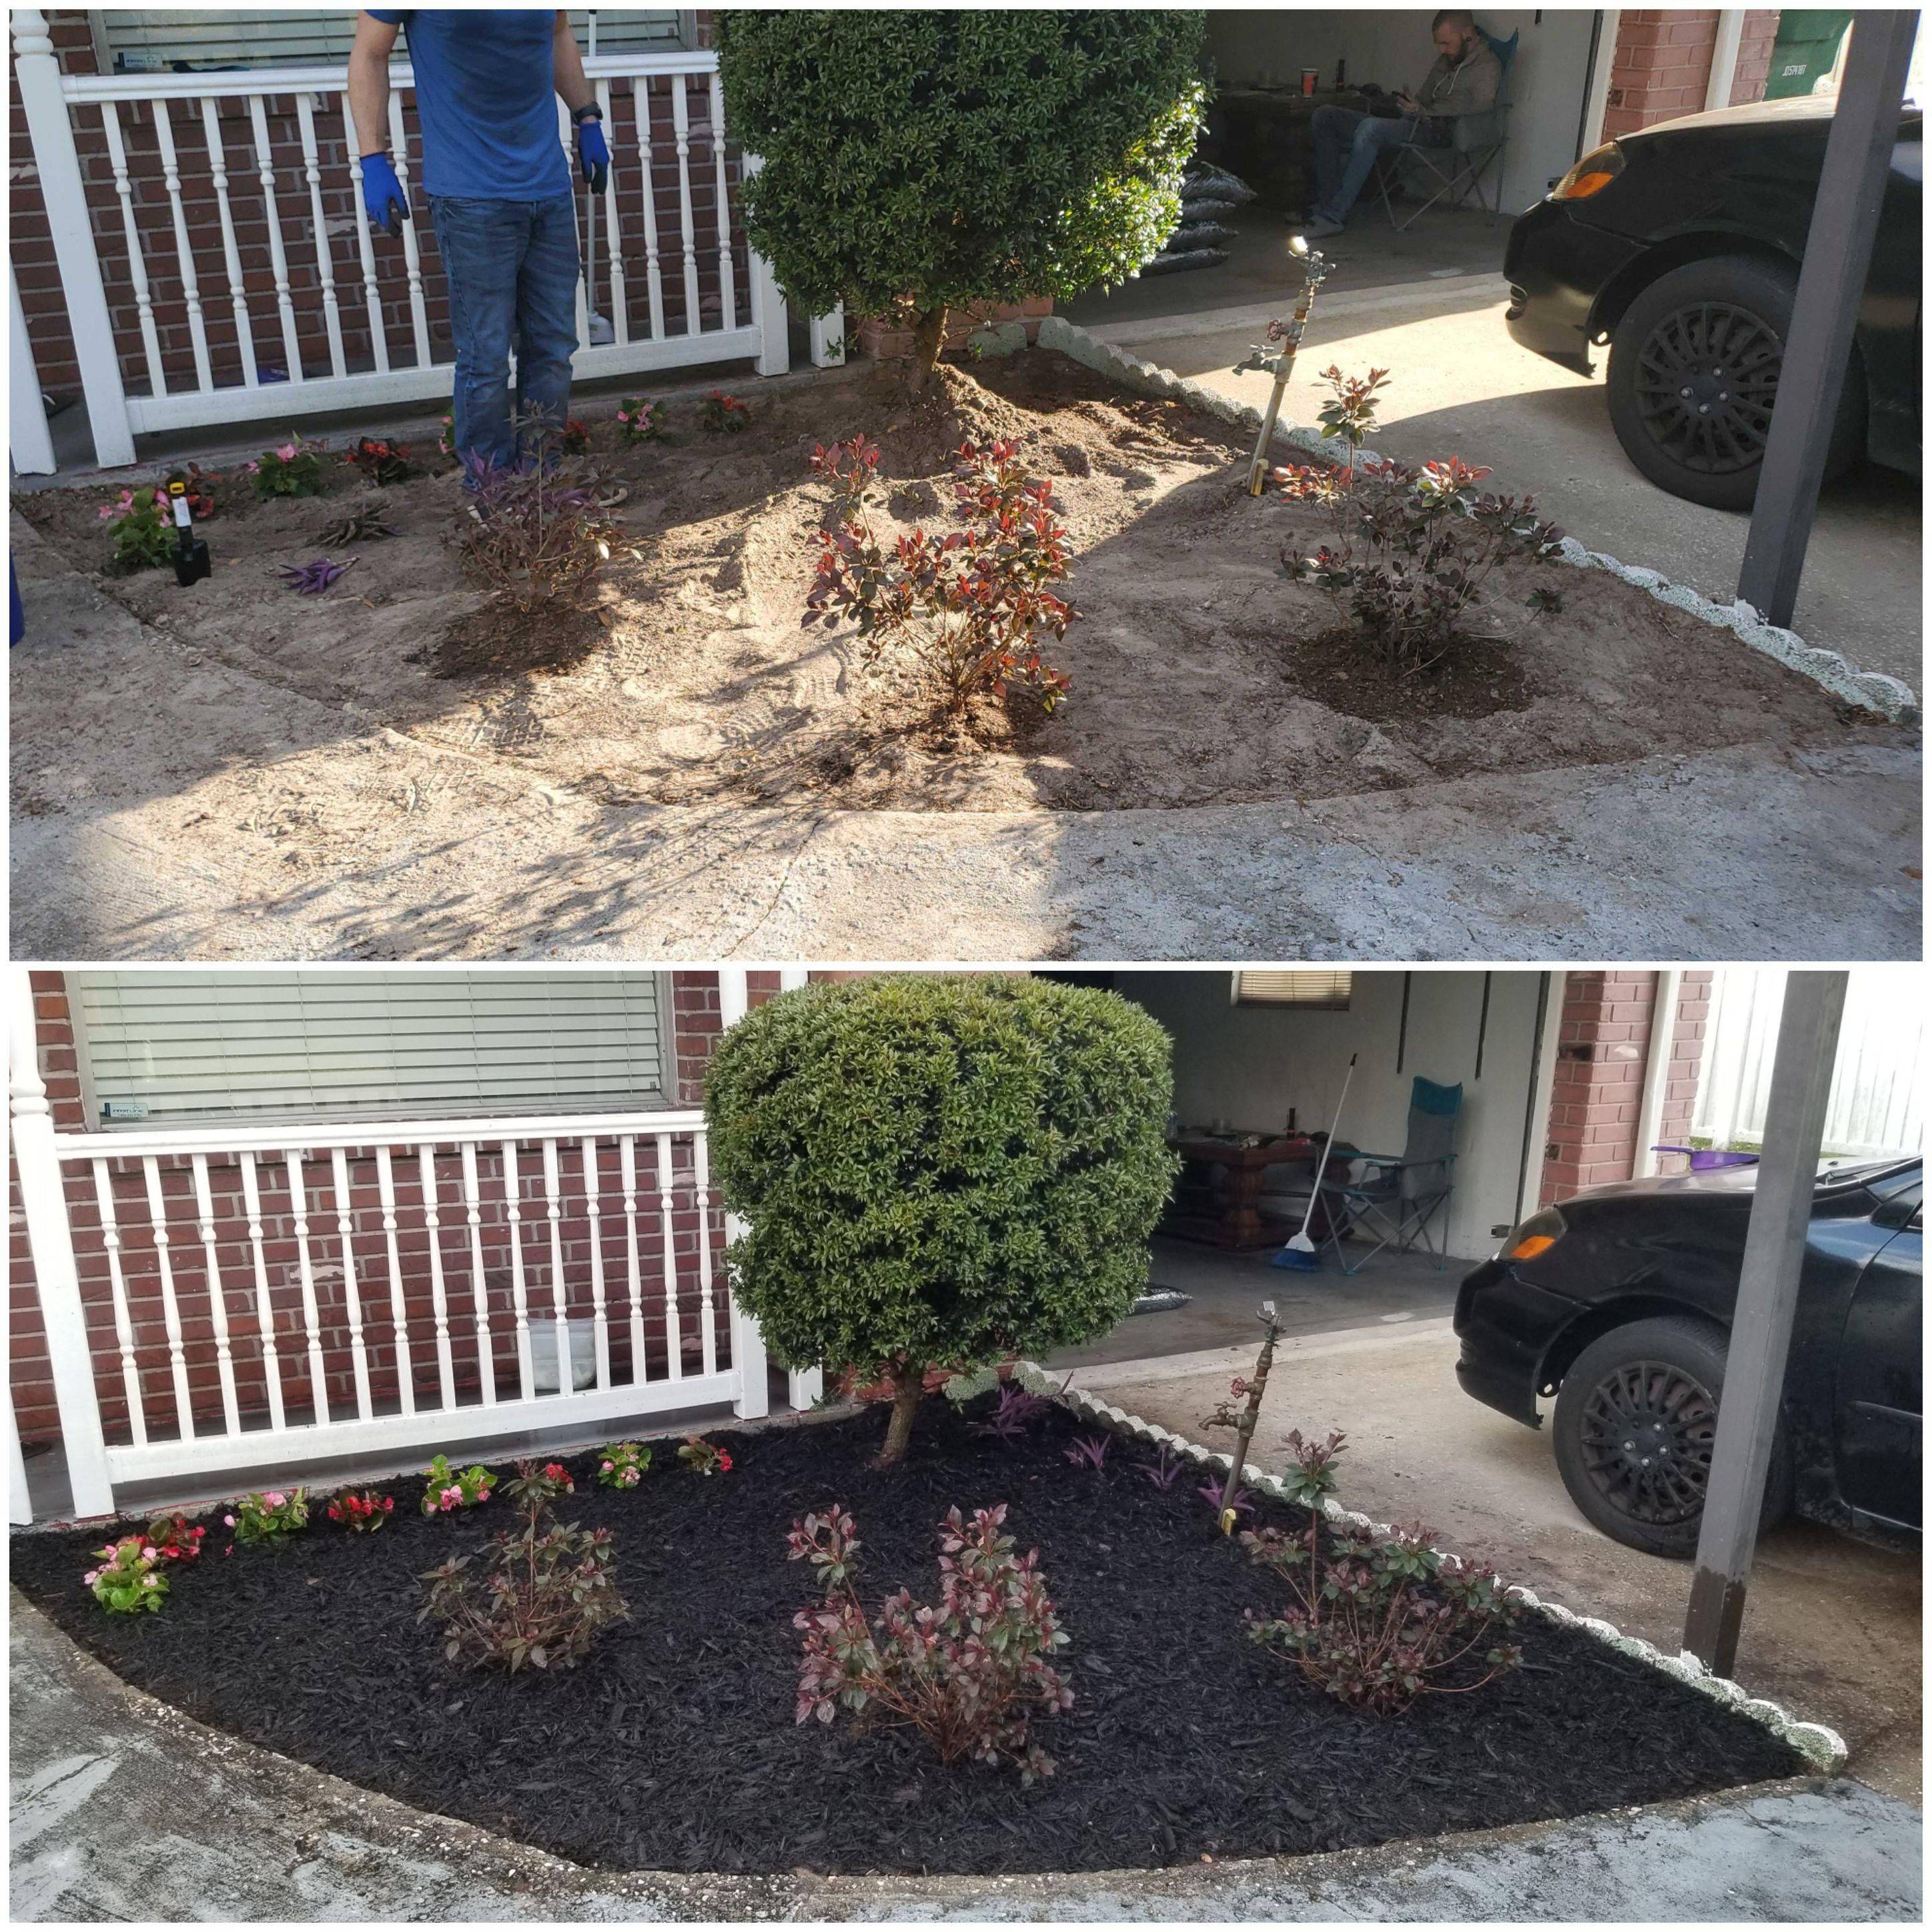 Before And After The Landscape Project